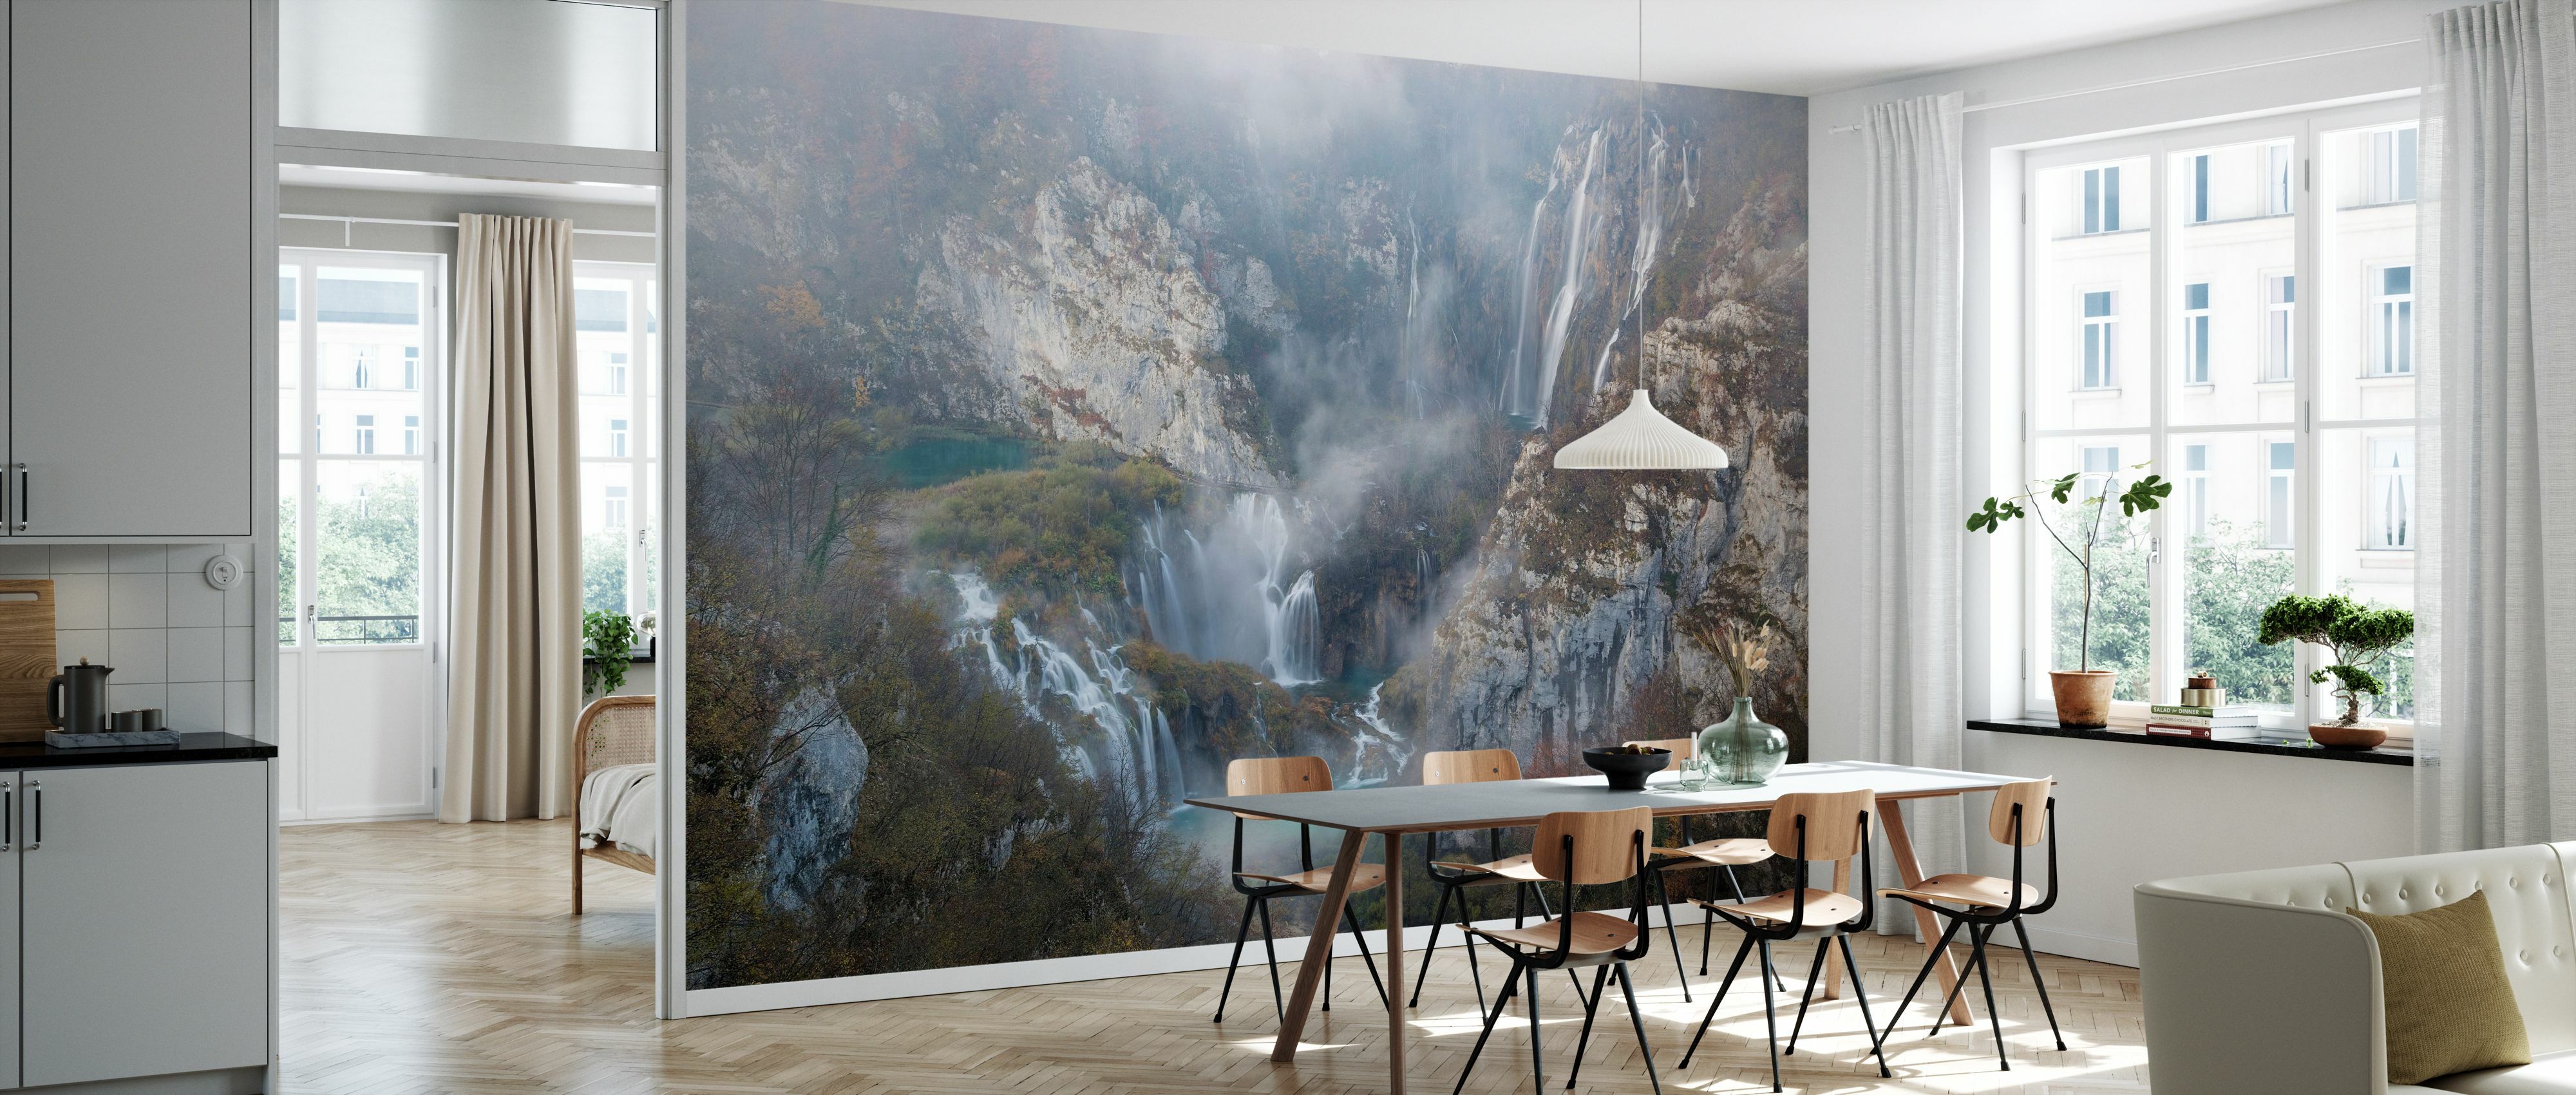 8 Marble Wallpapers To Update Any Space - PureWow